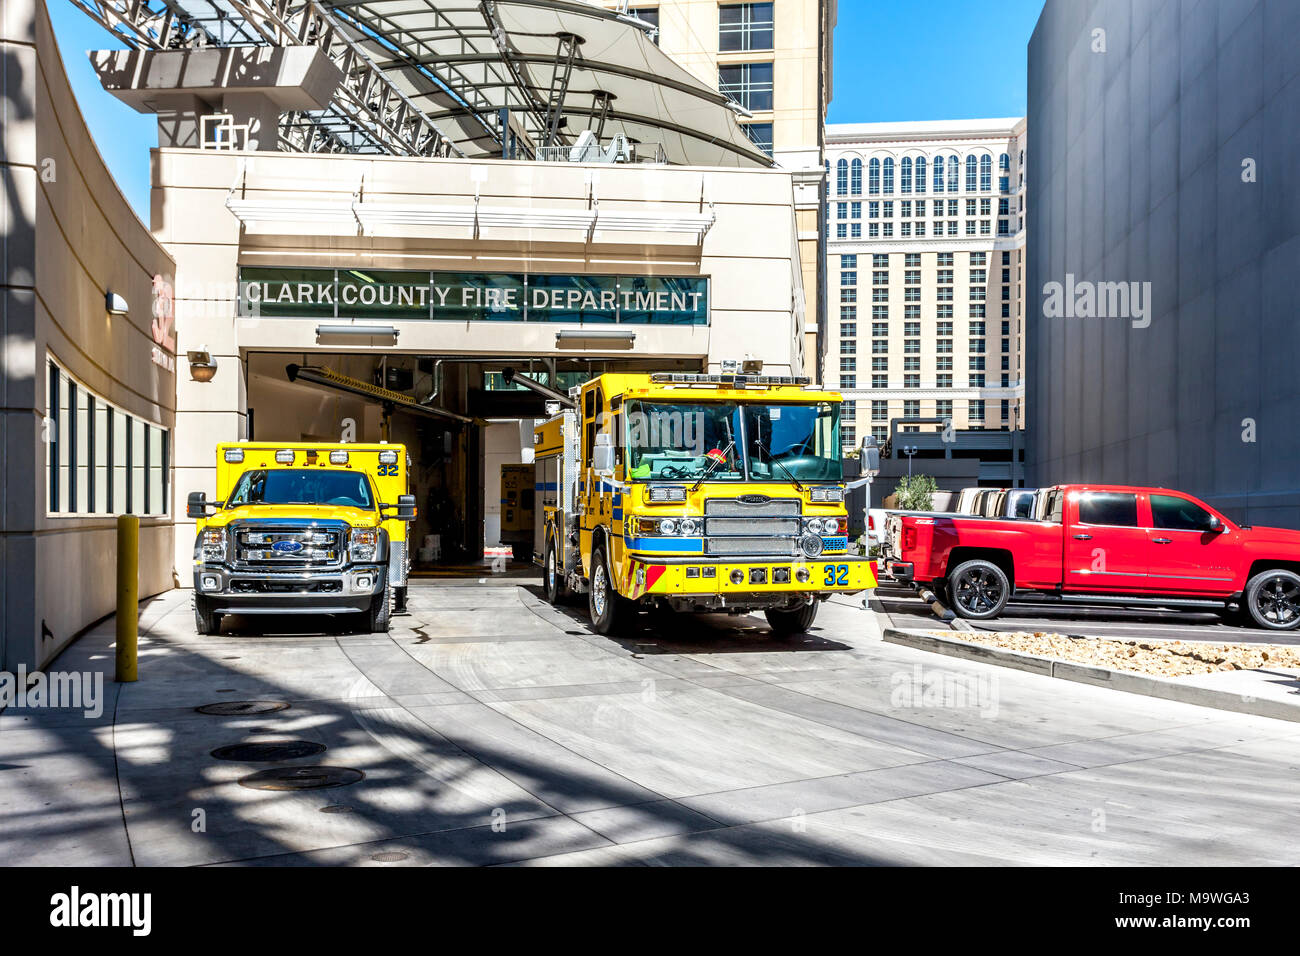 Clark County Fire Department, Fire truck parked up near the Vdara hotel and spar, Las Vegas, U.S.A. Stock Photo